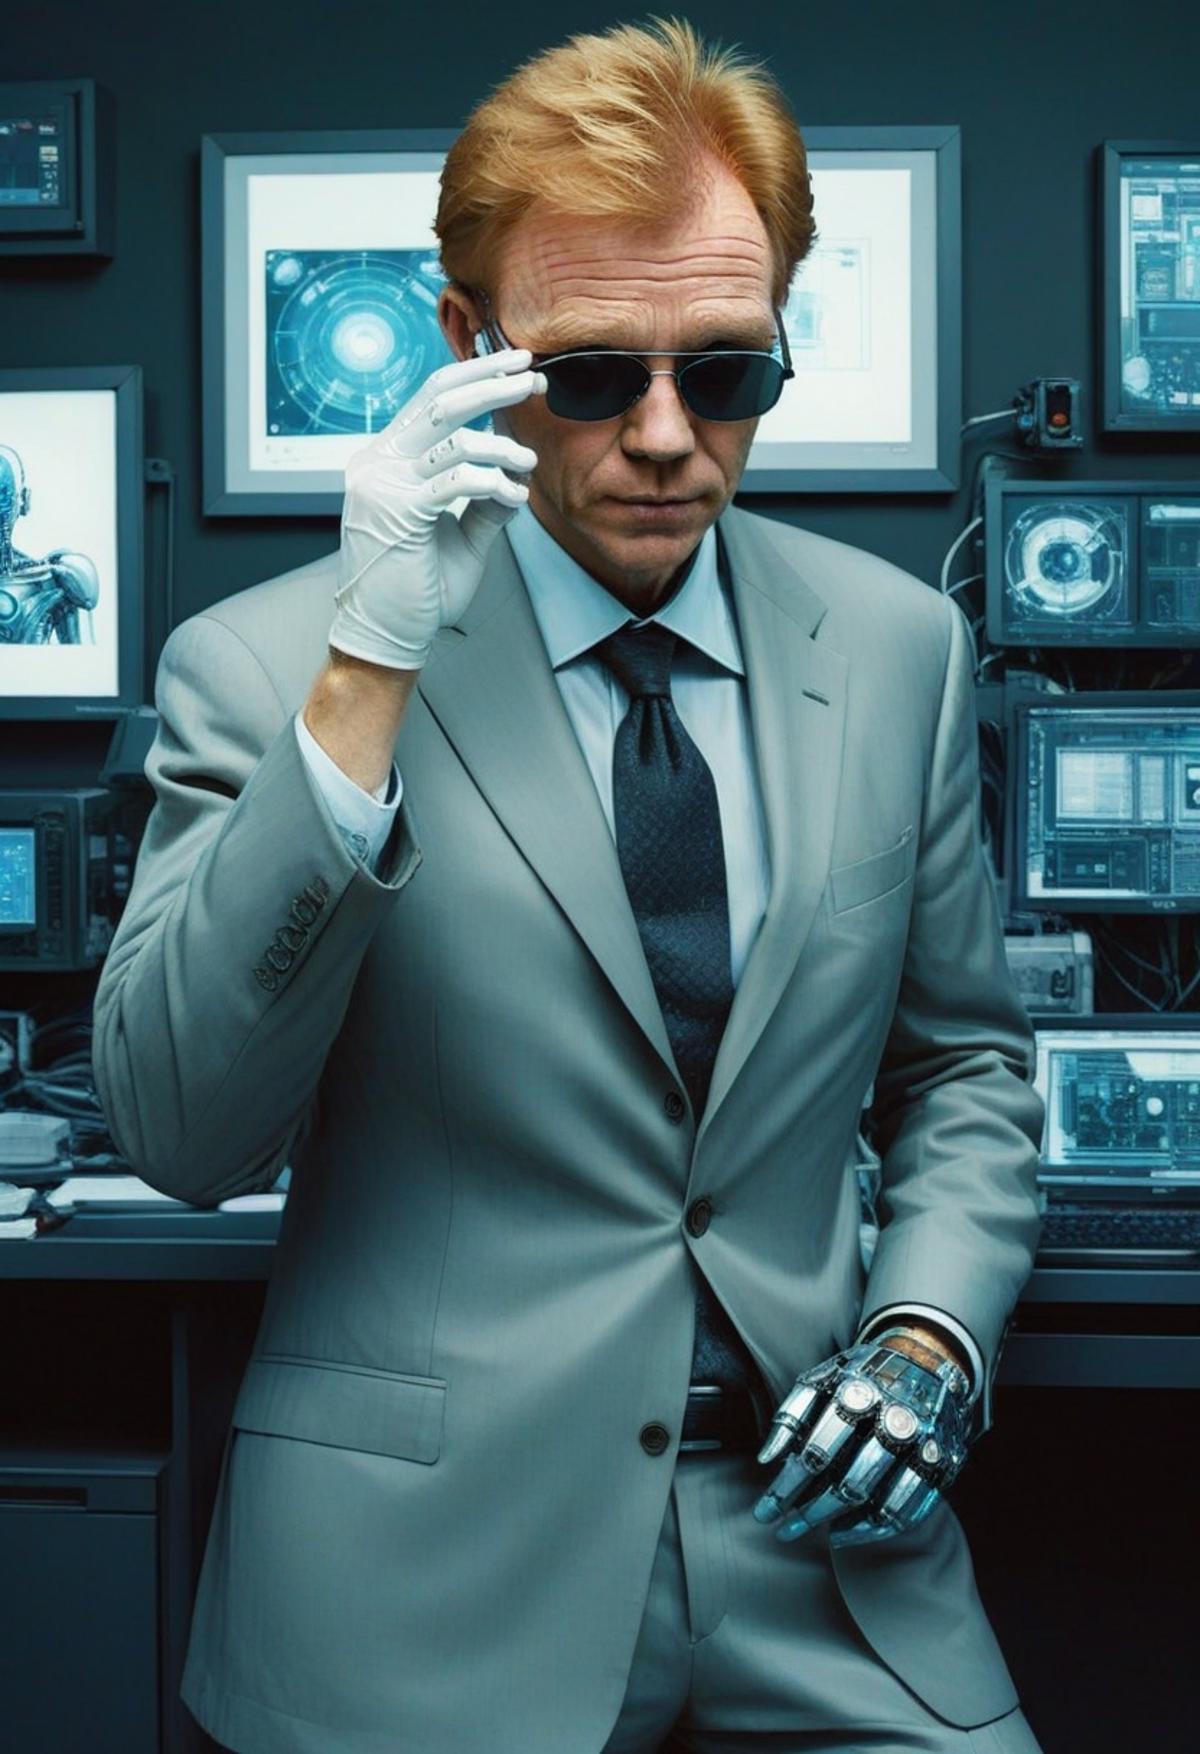 A man wearing a suit and tie, holding a cell phone and sunglasses.